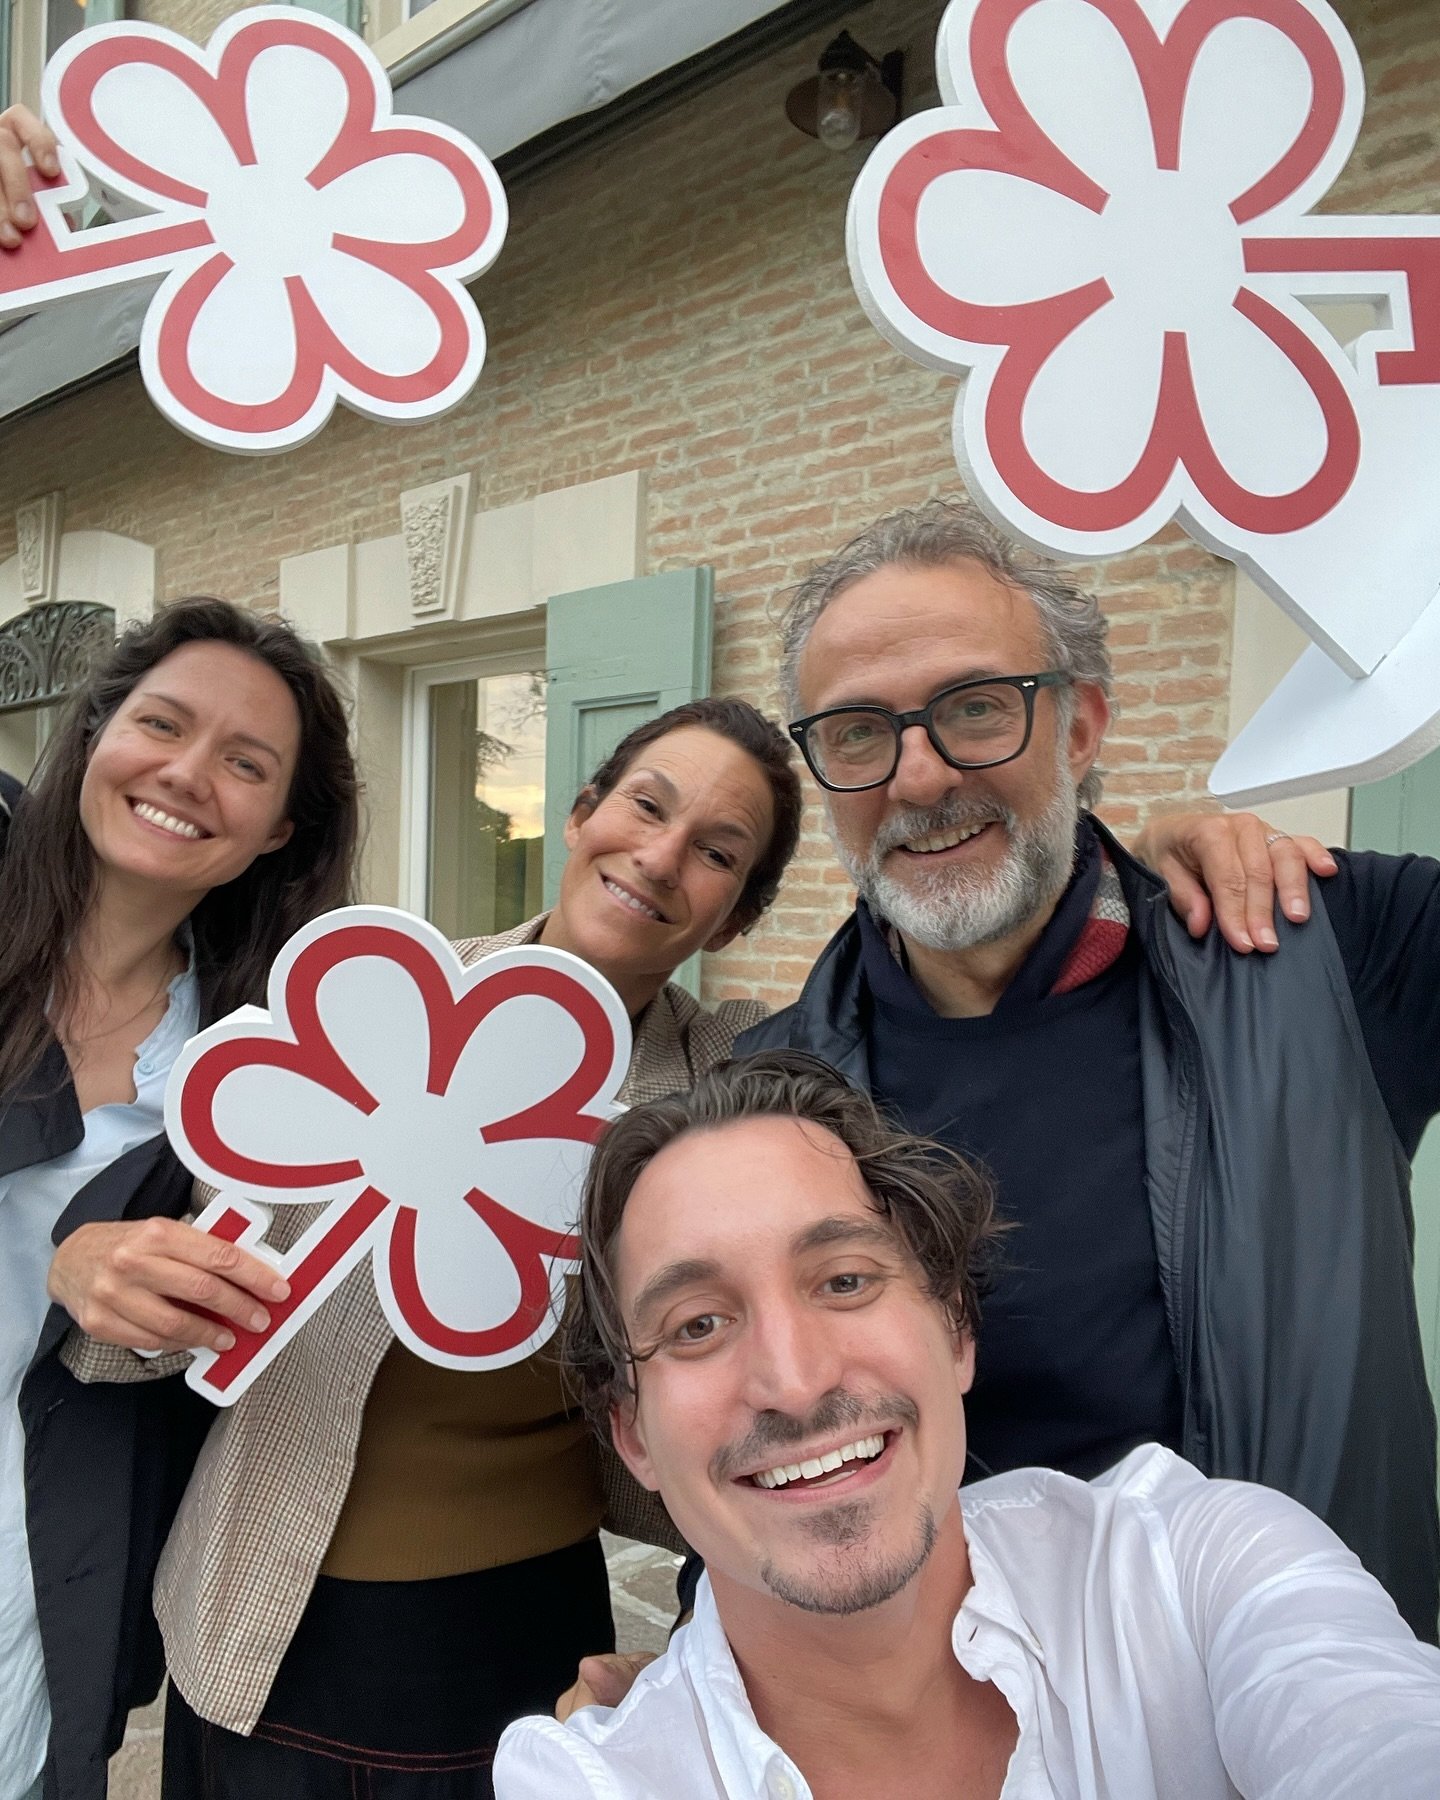 THREE MICHELIN KEYS FOR CASA MARIA LUIGIA!!!

Celebrating an unbelievable achievement as @casamarialuigia - the inimitable boutique hotel of chef @massimobottura and @laratgilmore - has been awarded Three Keys by the @michelinguide, an extraordinary 